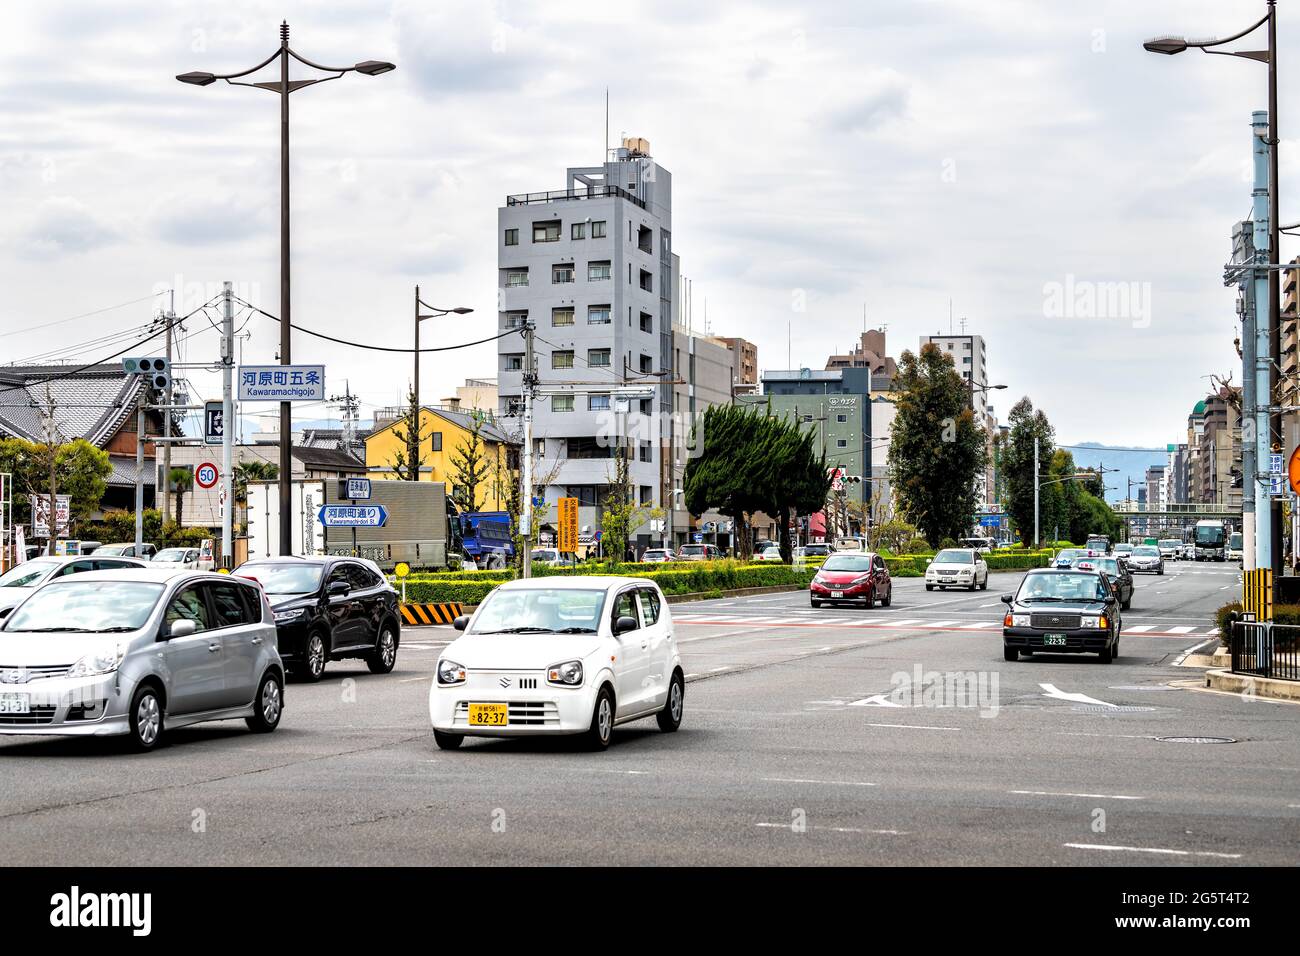 Kyoto, Japan - April 17, 2019: Taxi cars in traffic on road with kawaramachi street sign and English translation in busy downtown city Stock Photo